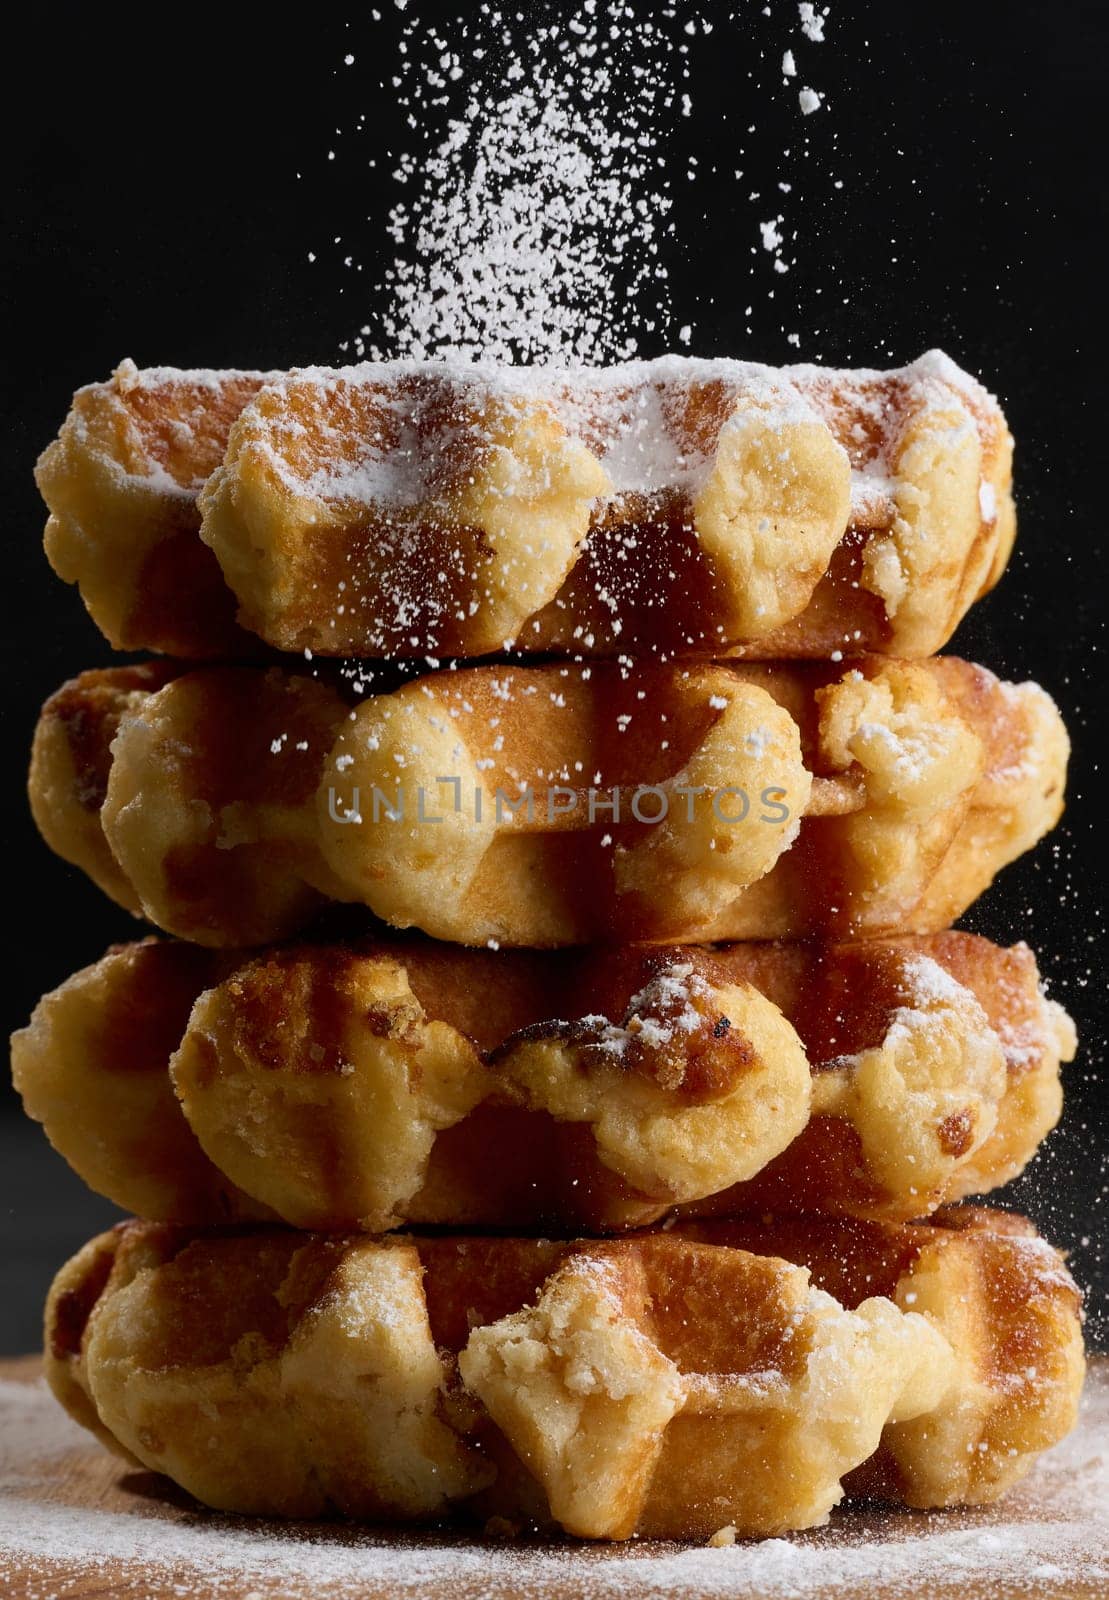 A stack of baked Belgian waffles sprinkled with powdered sugar by ndanko